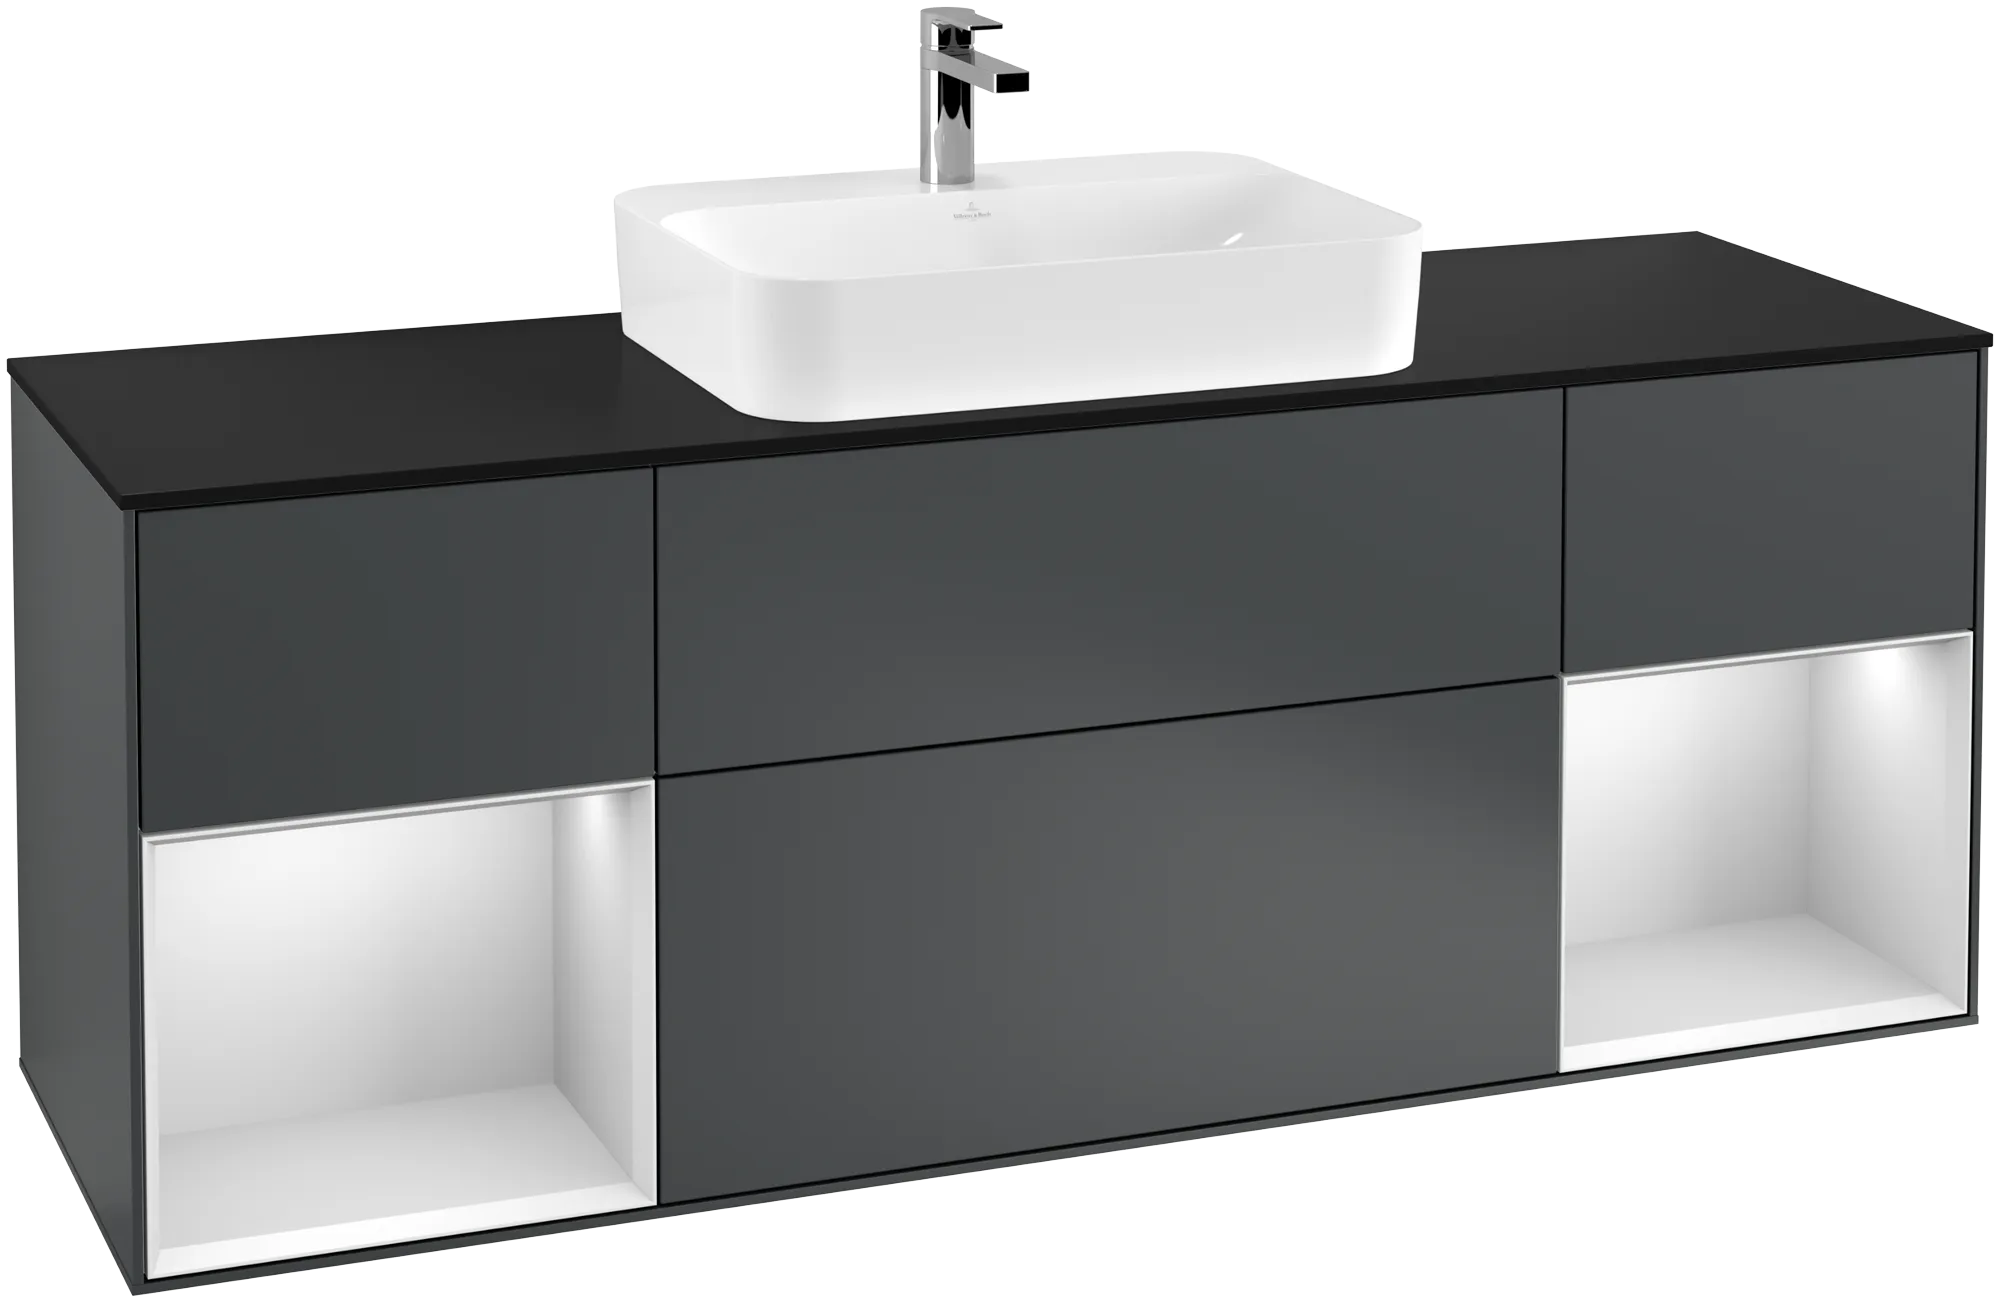 Picture of VILLEROY BOCH Finion Vanity unit, with lighting, 4 pull-out compartments, 1600 x 603 x 501 mm, Midnight Blue Matt Lacquer / White Matt Lacquer / Glass Black Matt #G452MTHG